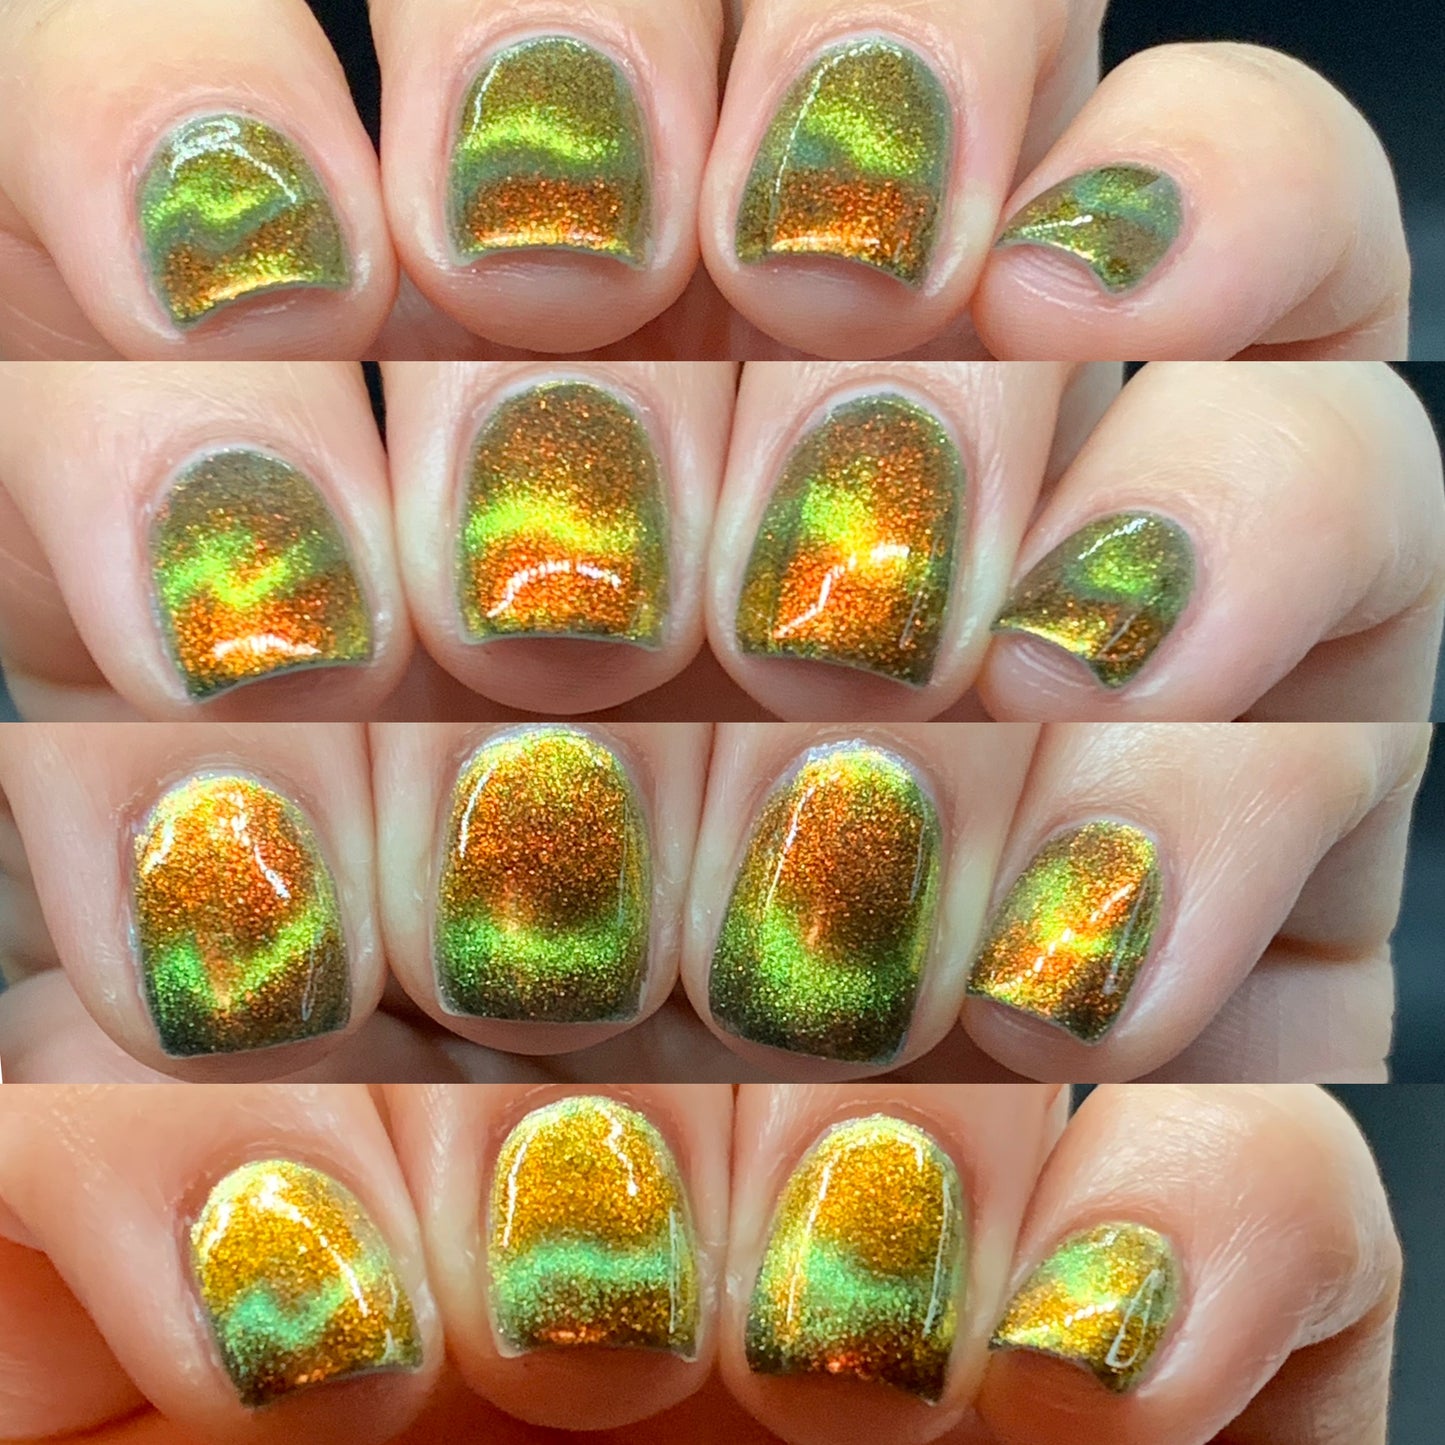 Cosmic Chaos - Red/Orange Multichrome Magnetic Nail Polish - Into the Multiverse Collection